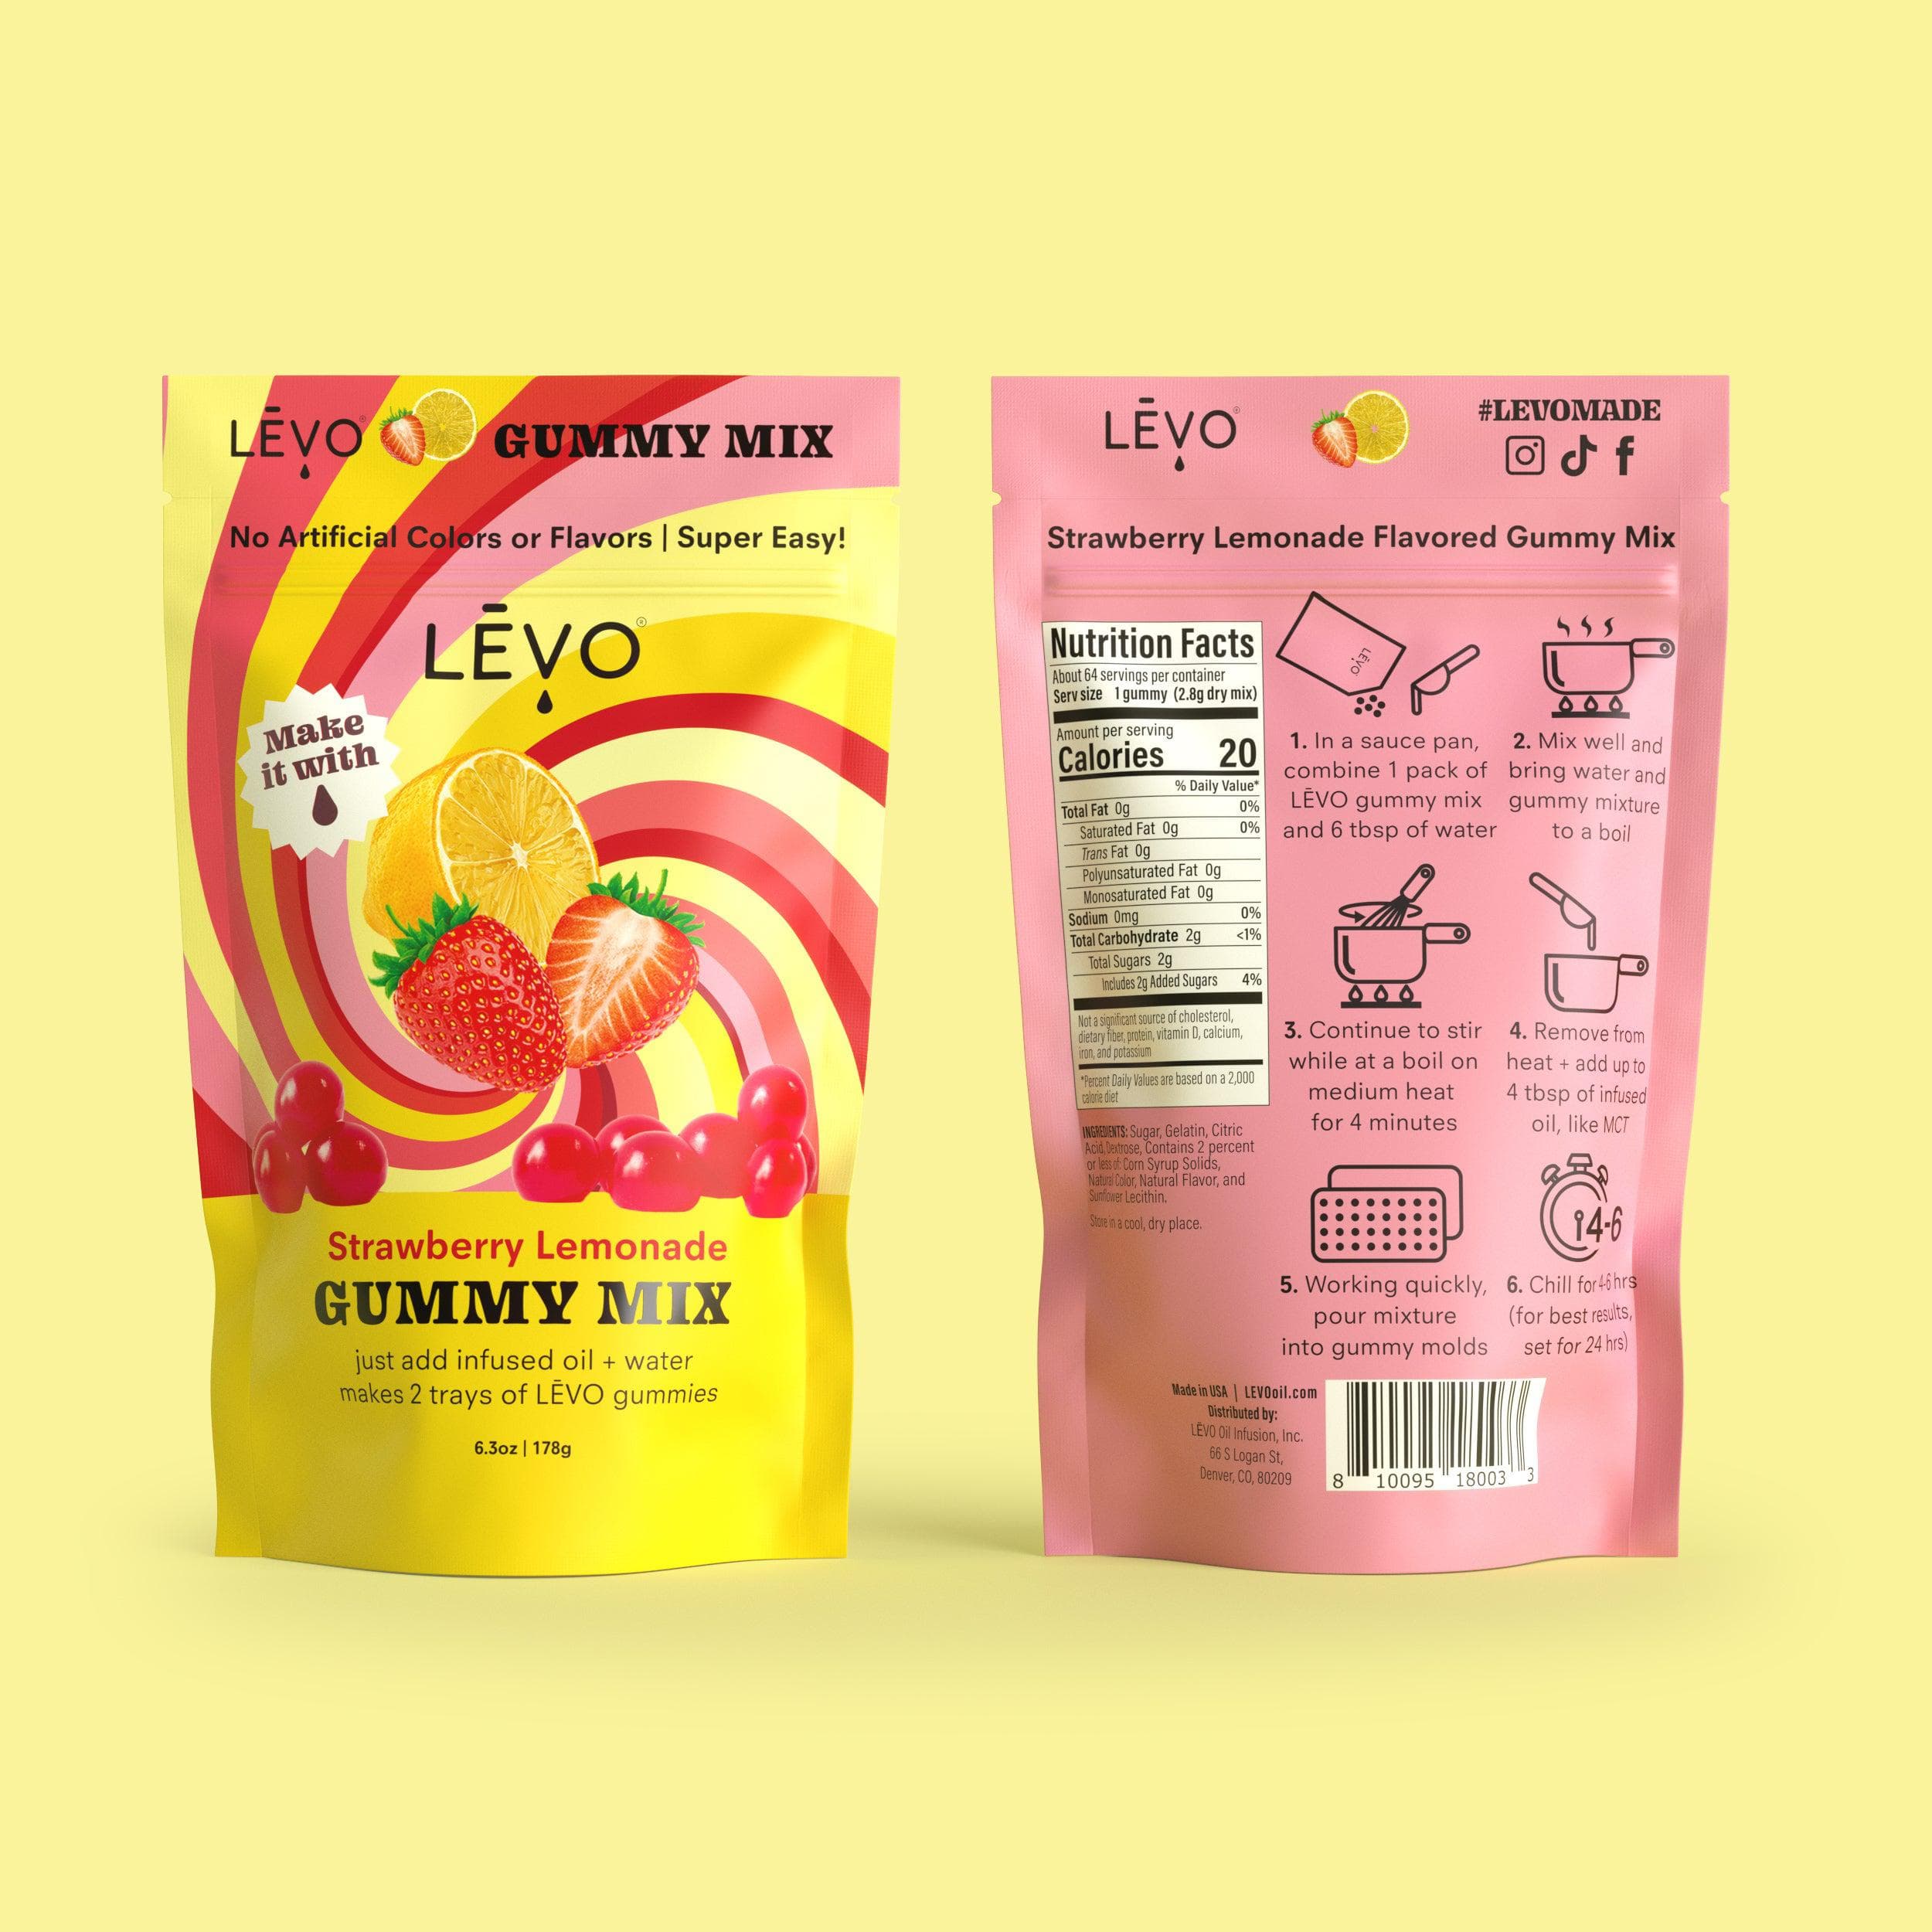 LEVO Gummy Mix Strawberry Lemonade packaging front and back.